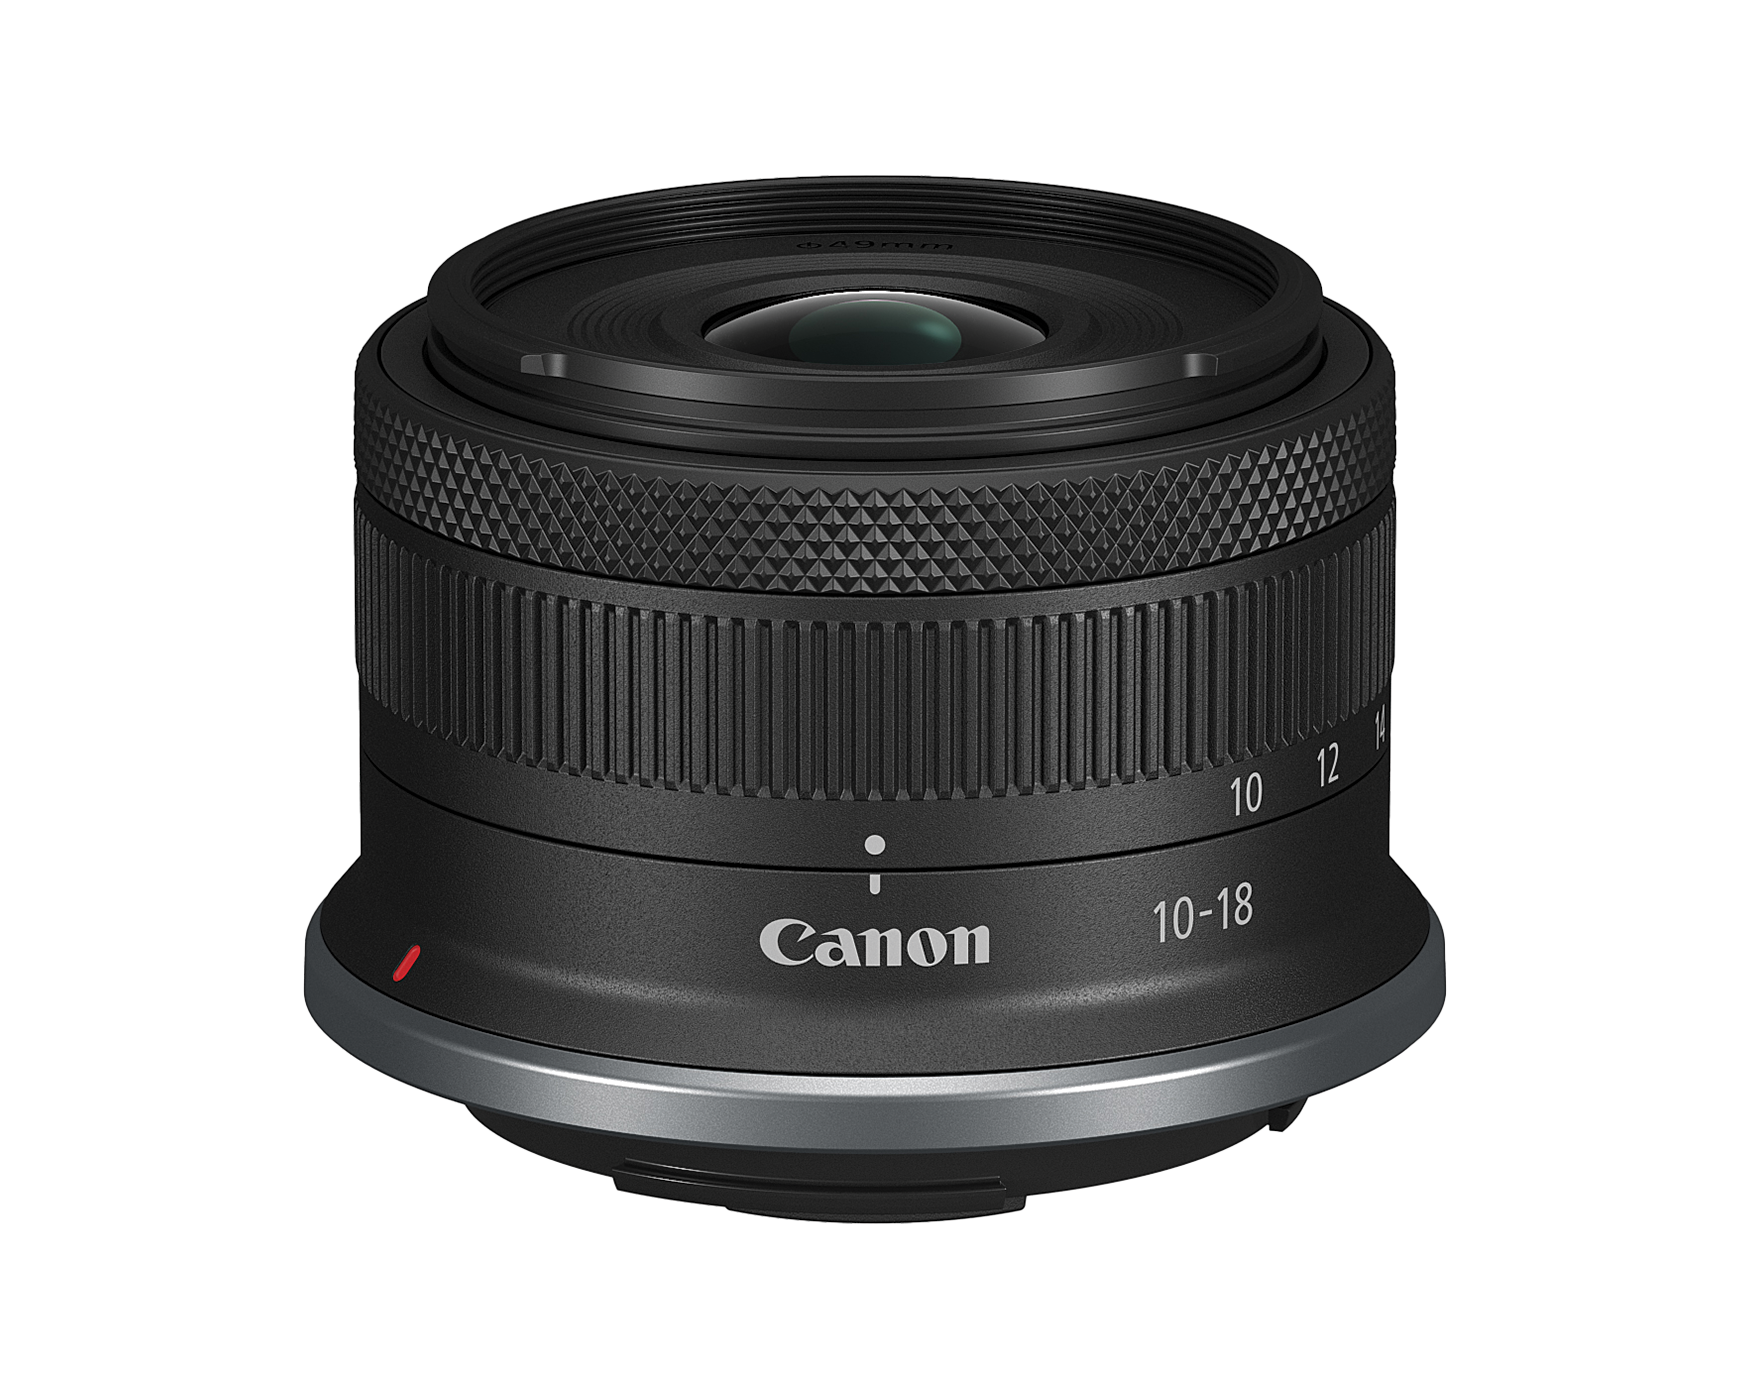 pr rf s10 18mm 2 - Canon Introduces Three New Lenses, Enhancing Still Photography and Video Production for Any Skill Level